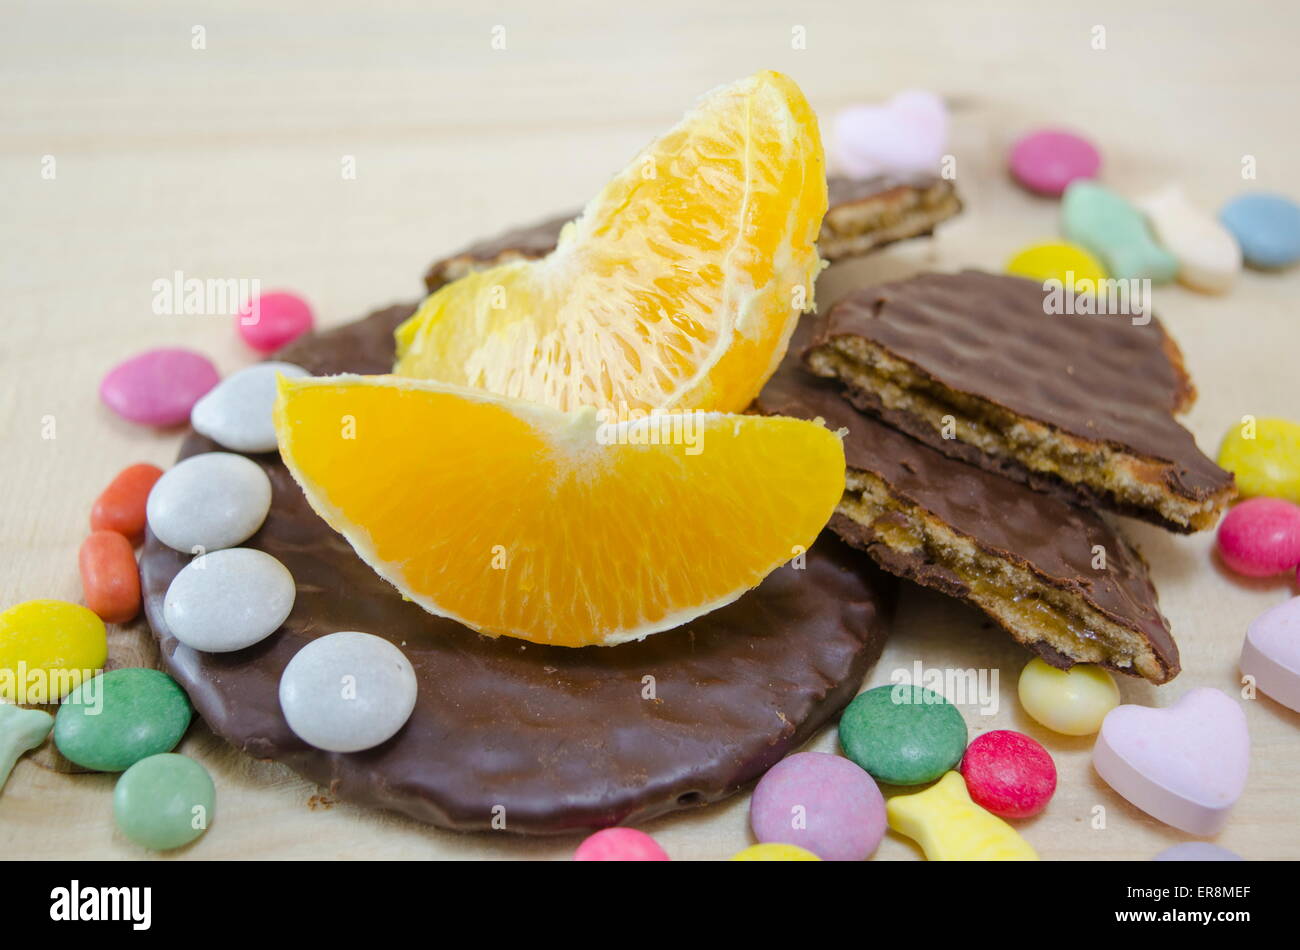 Fresh orange, biscuits and colorful bonbons on a wooden table Stock Photo